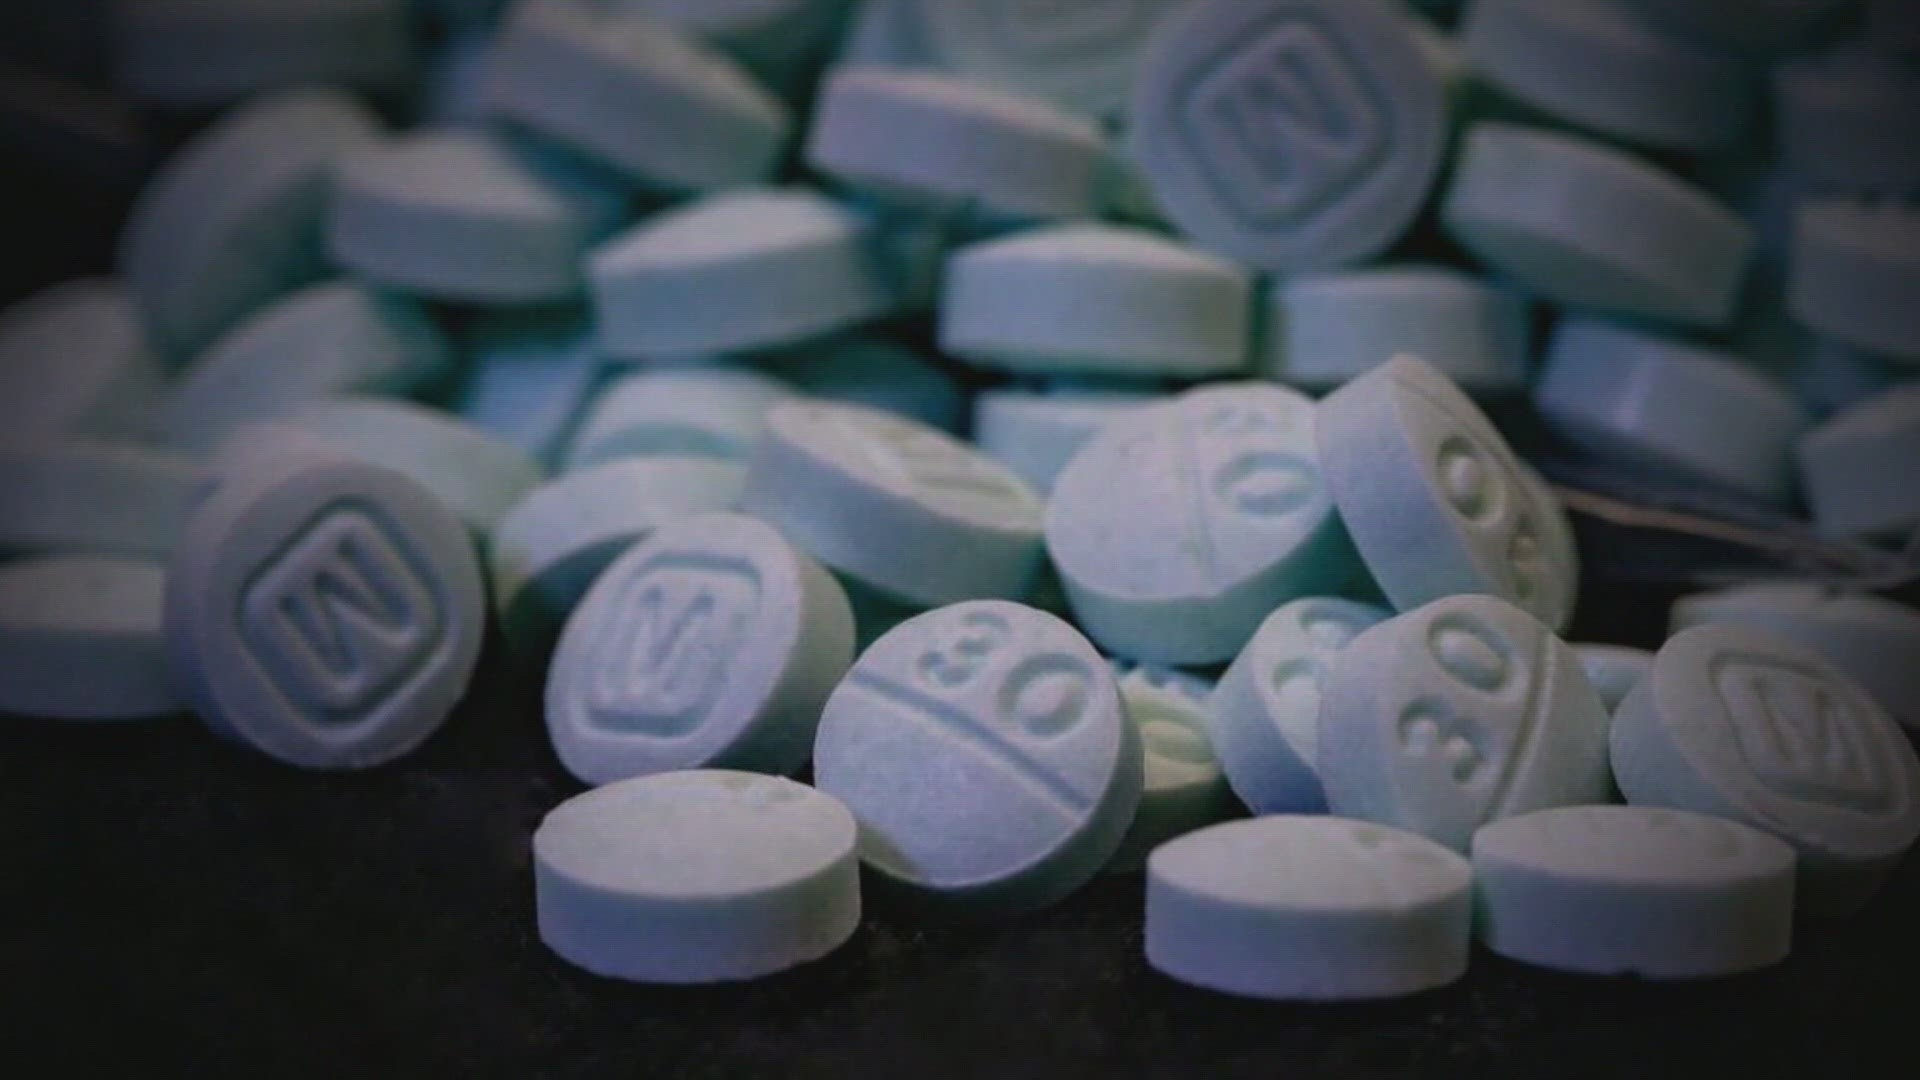 Just last year, the DEA seized over 79.4 million Fentanyl laced fake pills in the country.